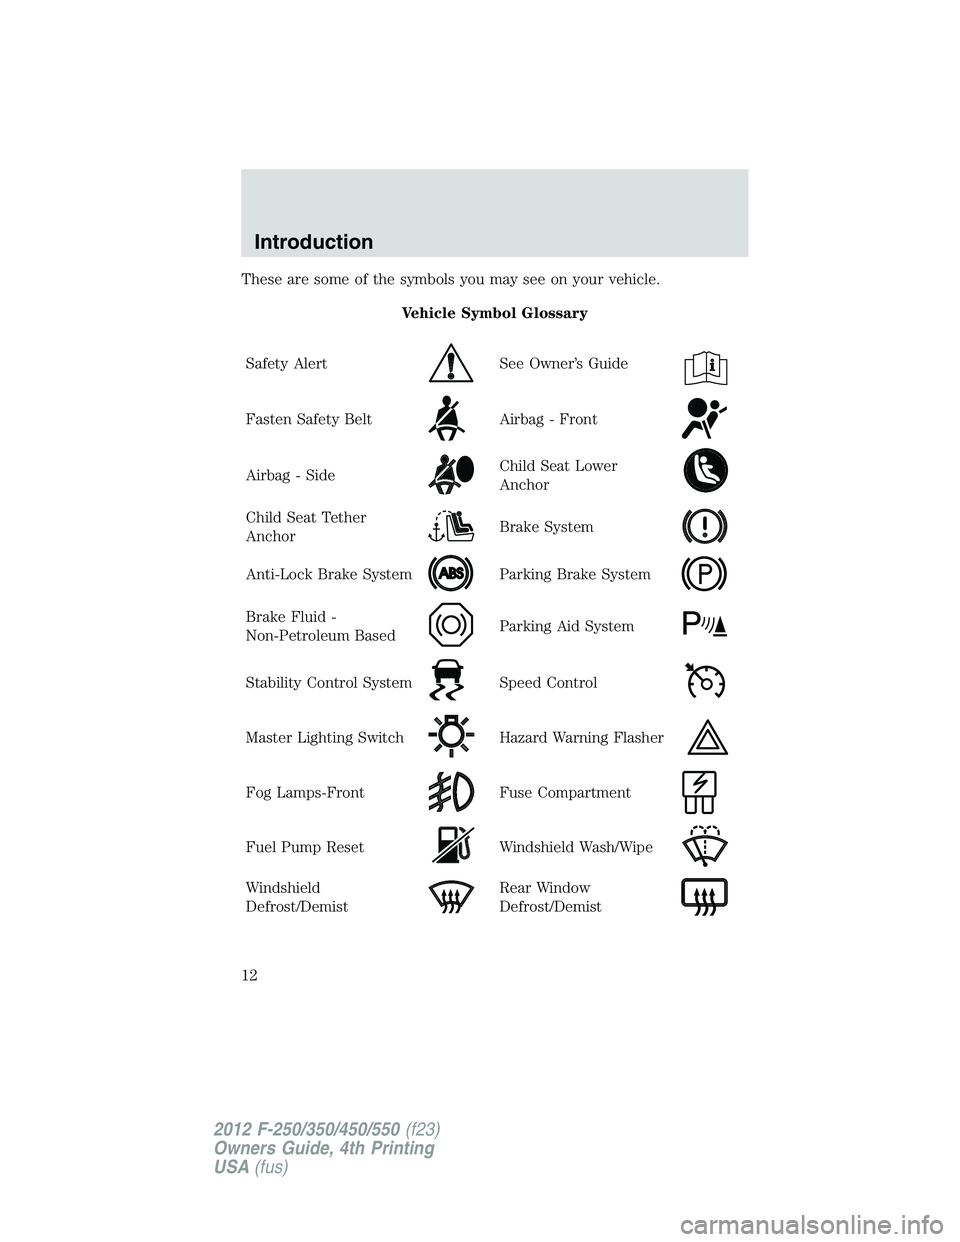 FORD F250 SUPER DUTY 2012  Owners Manual These are some of the symbols you may see on your vehicle.
Vehicle Symbol Glossary
Safety Alert See Owner’s Guide
Fasten Safety Belt Airbag - Front
Airbag - Side Child Seat Lower
Anchor
Child Seat T